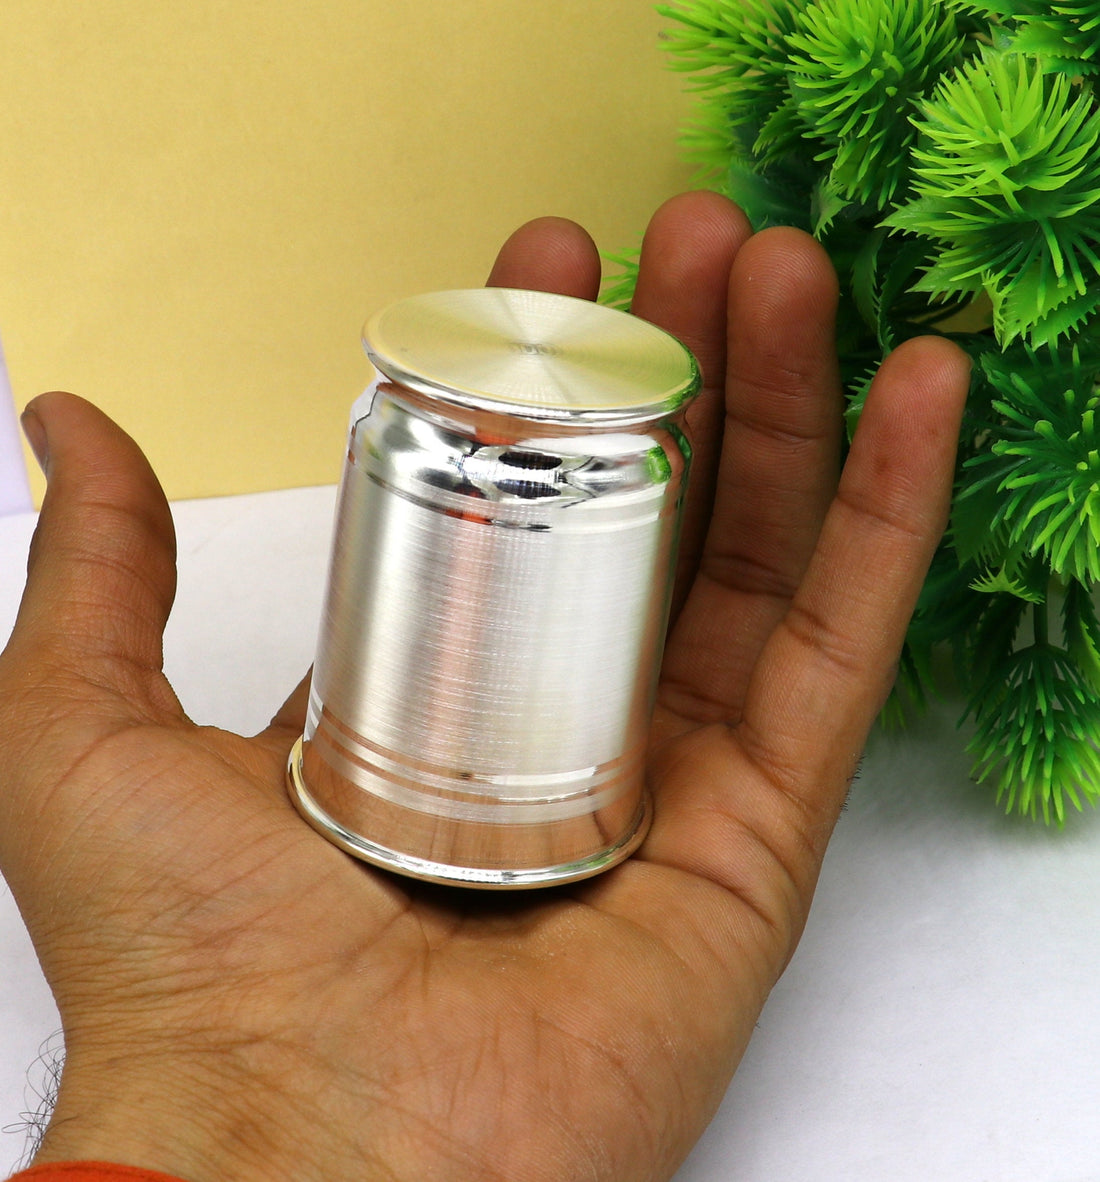 999 fine silver handmade vessel, water/milk Glass tumbler, silver flask, baby kids silver utensils stay healthy gift article  sv105 - TRIBAL ORNAMENTS